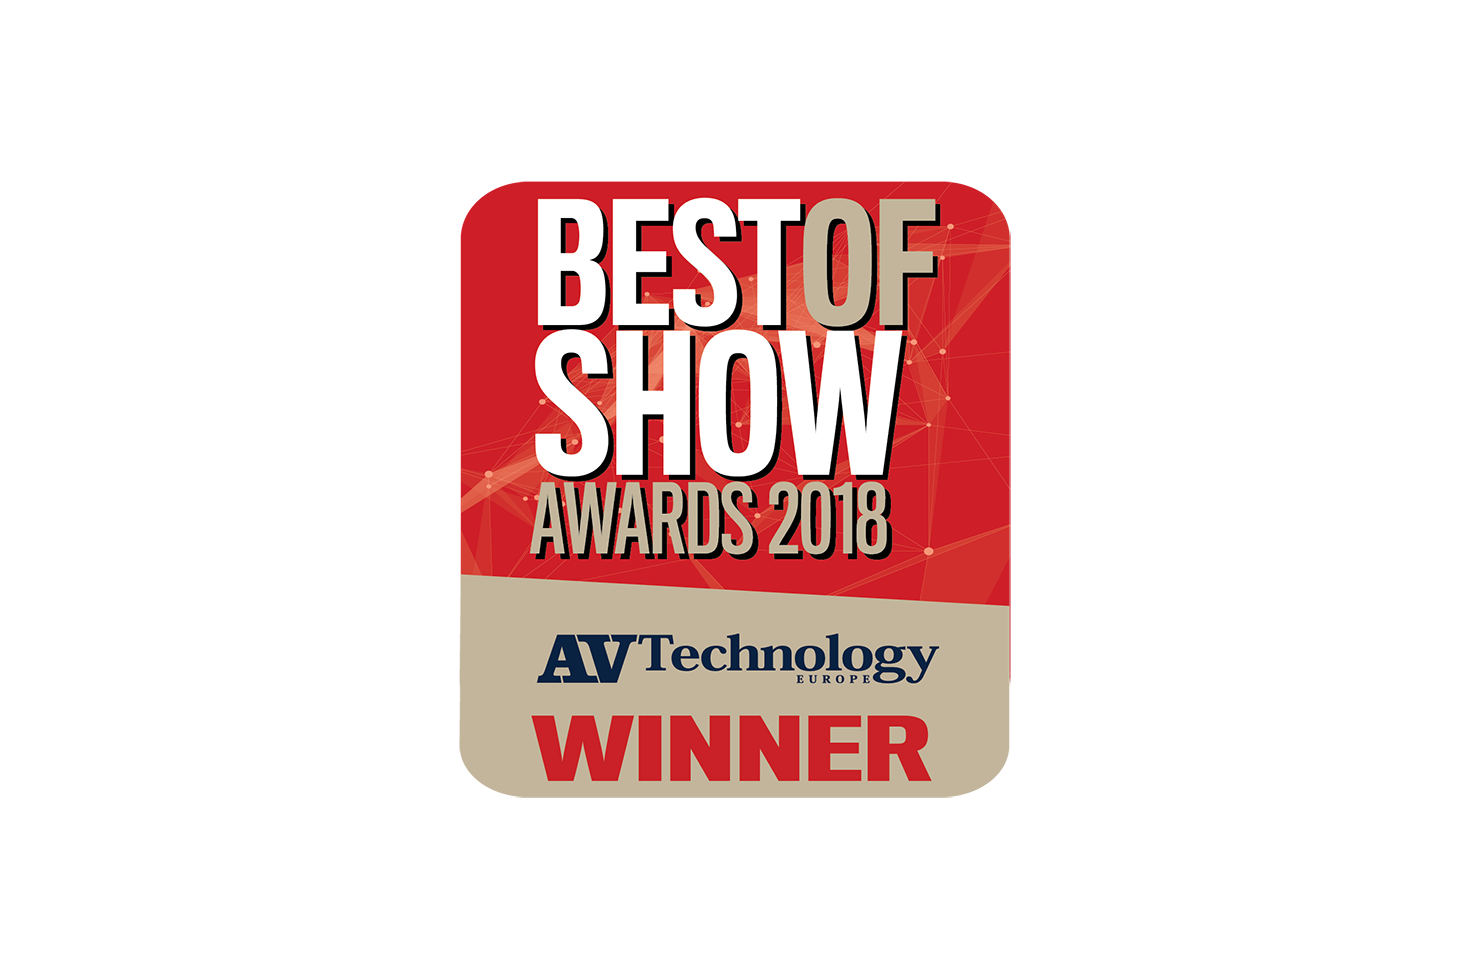 Best of Show Award 2018 ISE